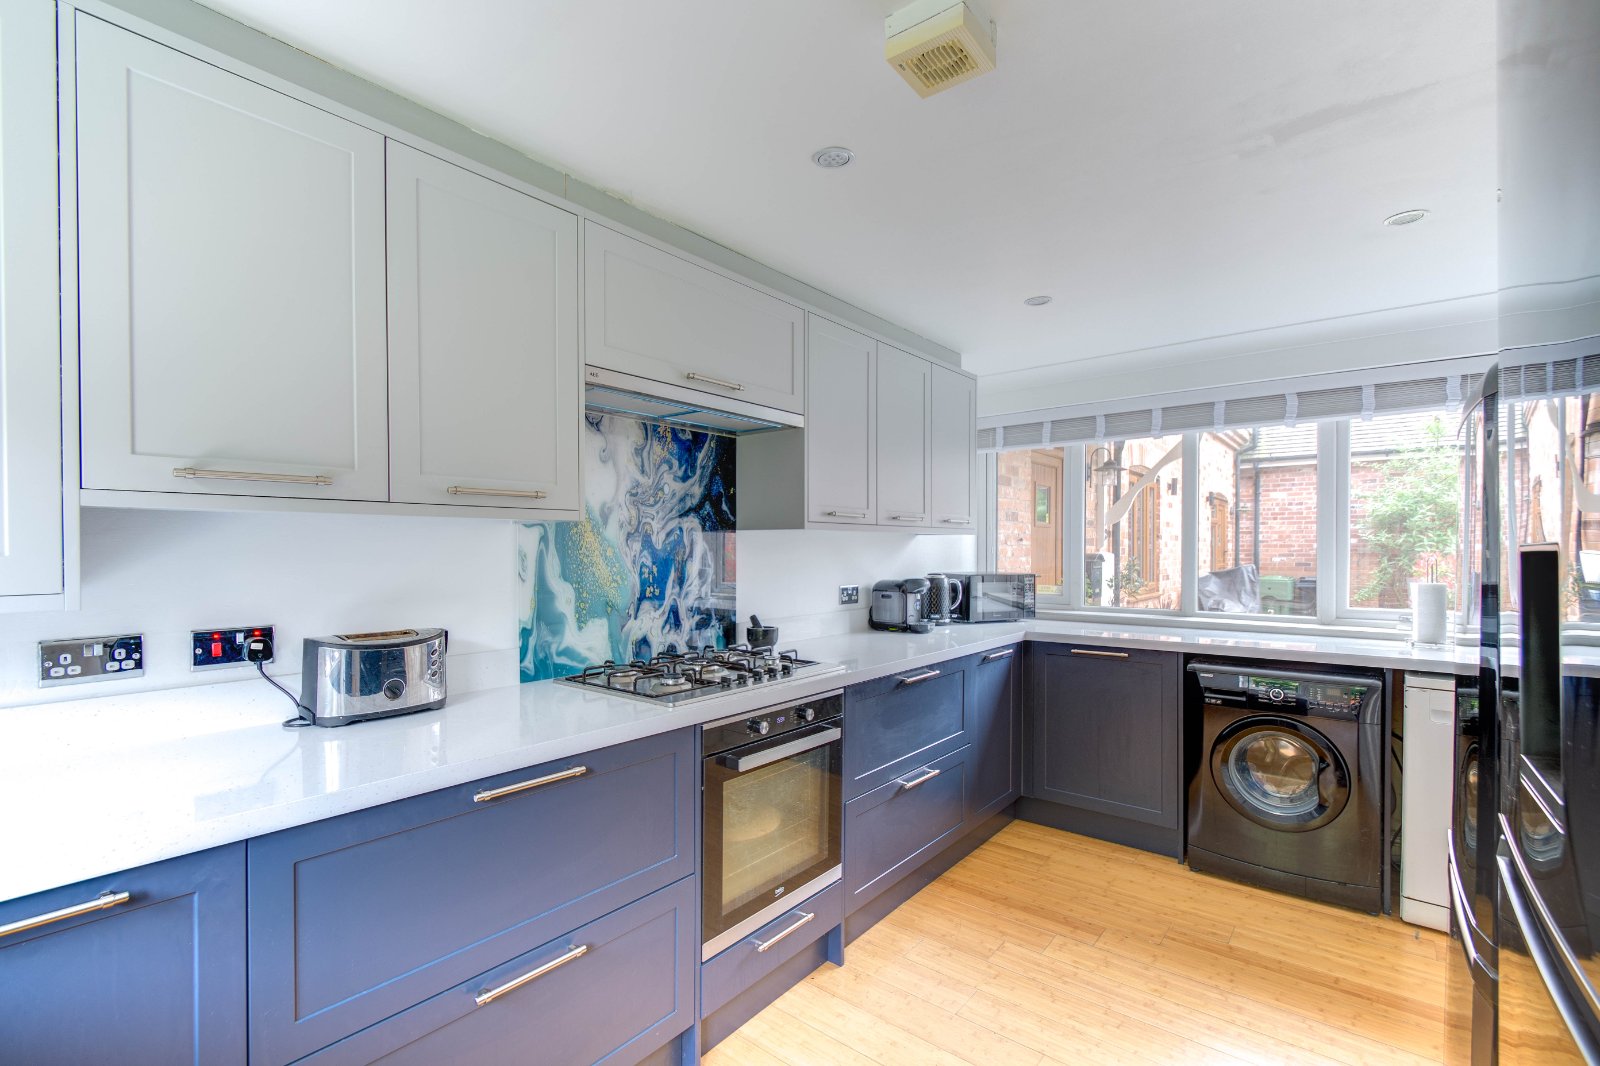 4 bed  for sale in Linthurst Road, Barnt Green  - Property Image 4